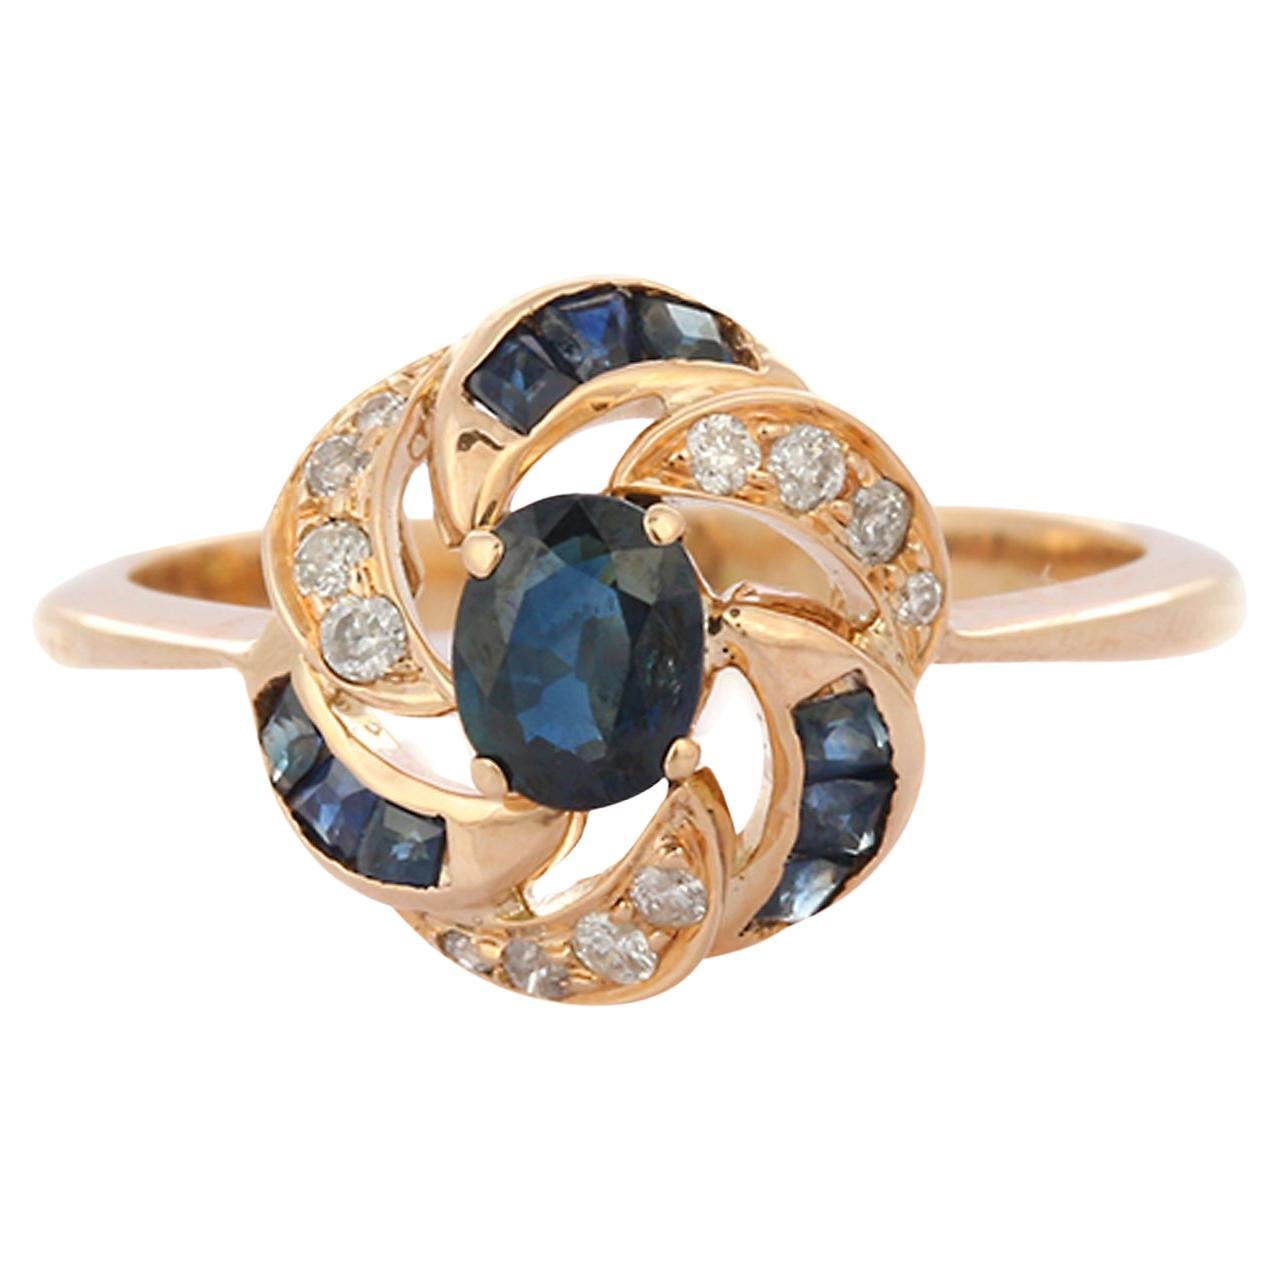 Enticing Sapphire Diamond Floral Bridal Ring in 14K Solid Gelbgold